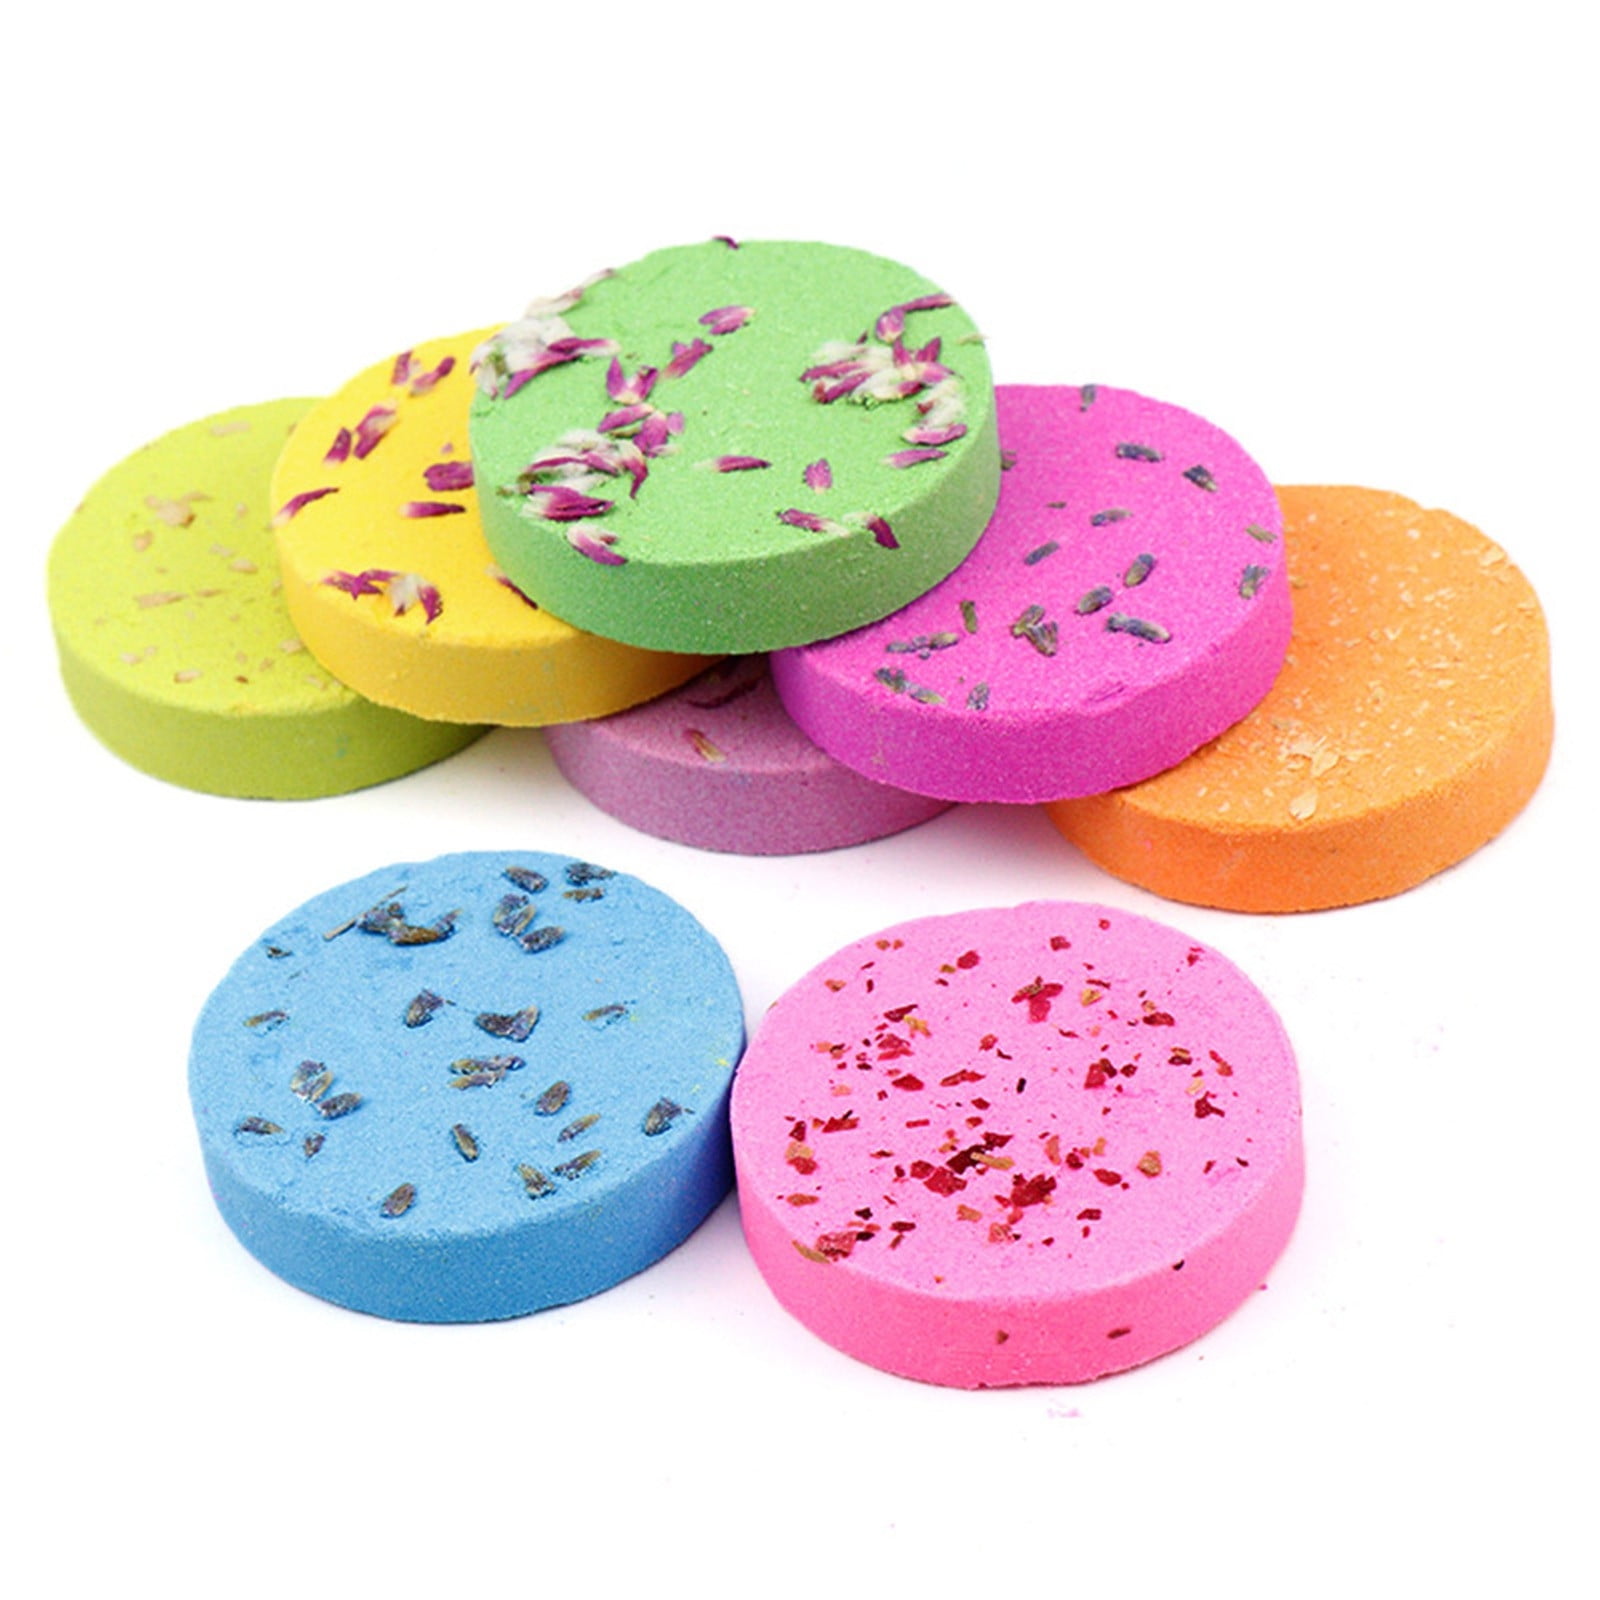 Shower Steamers – Love Yourself Body and Skin Care